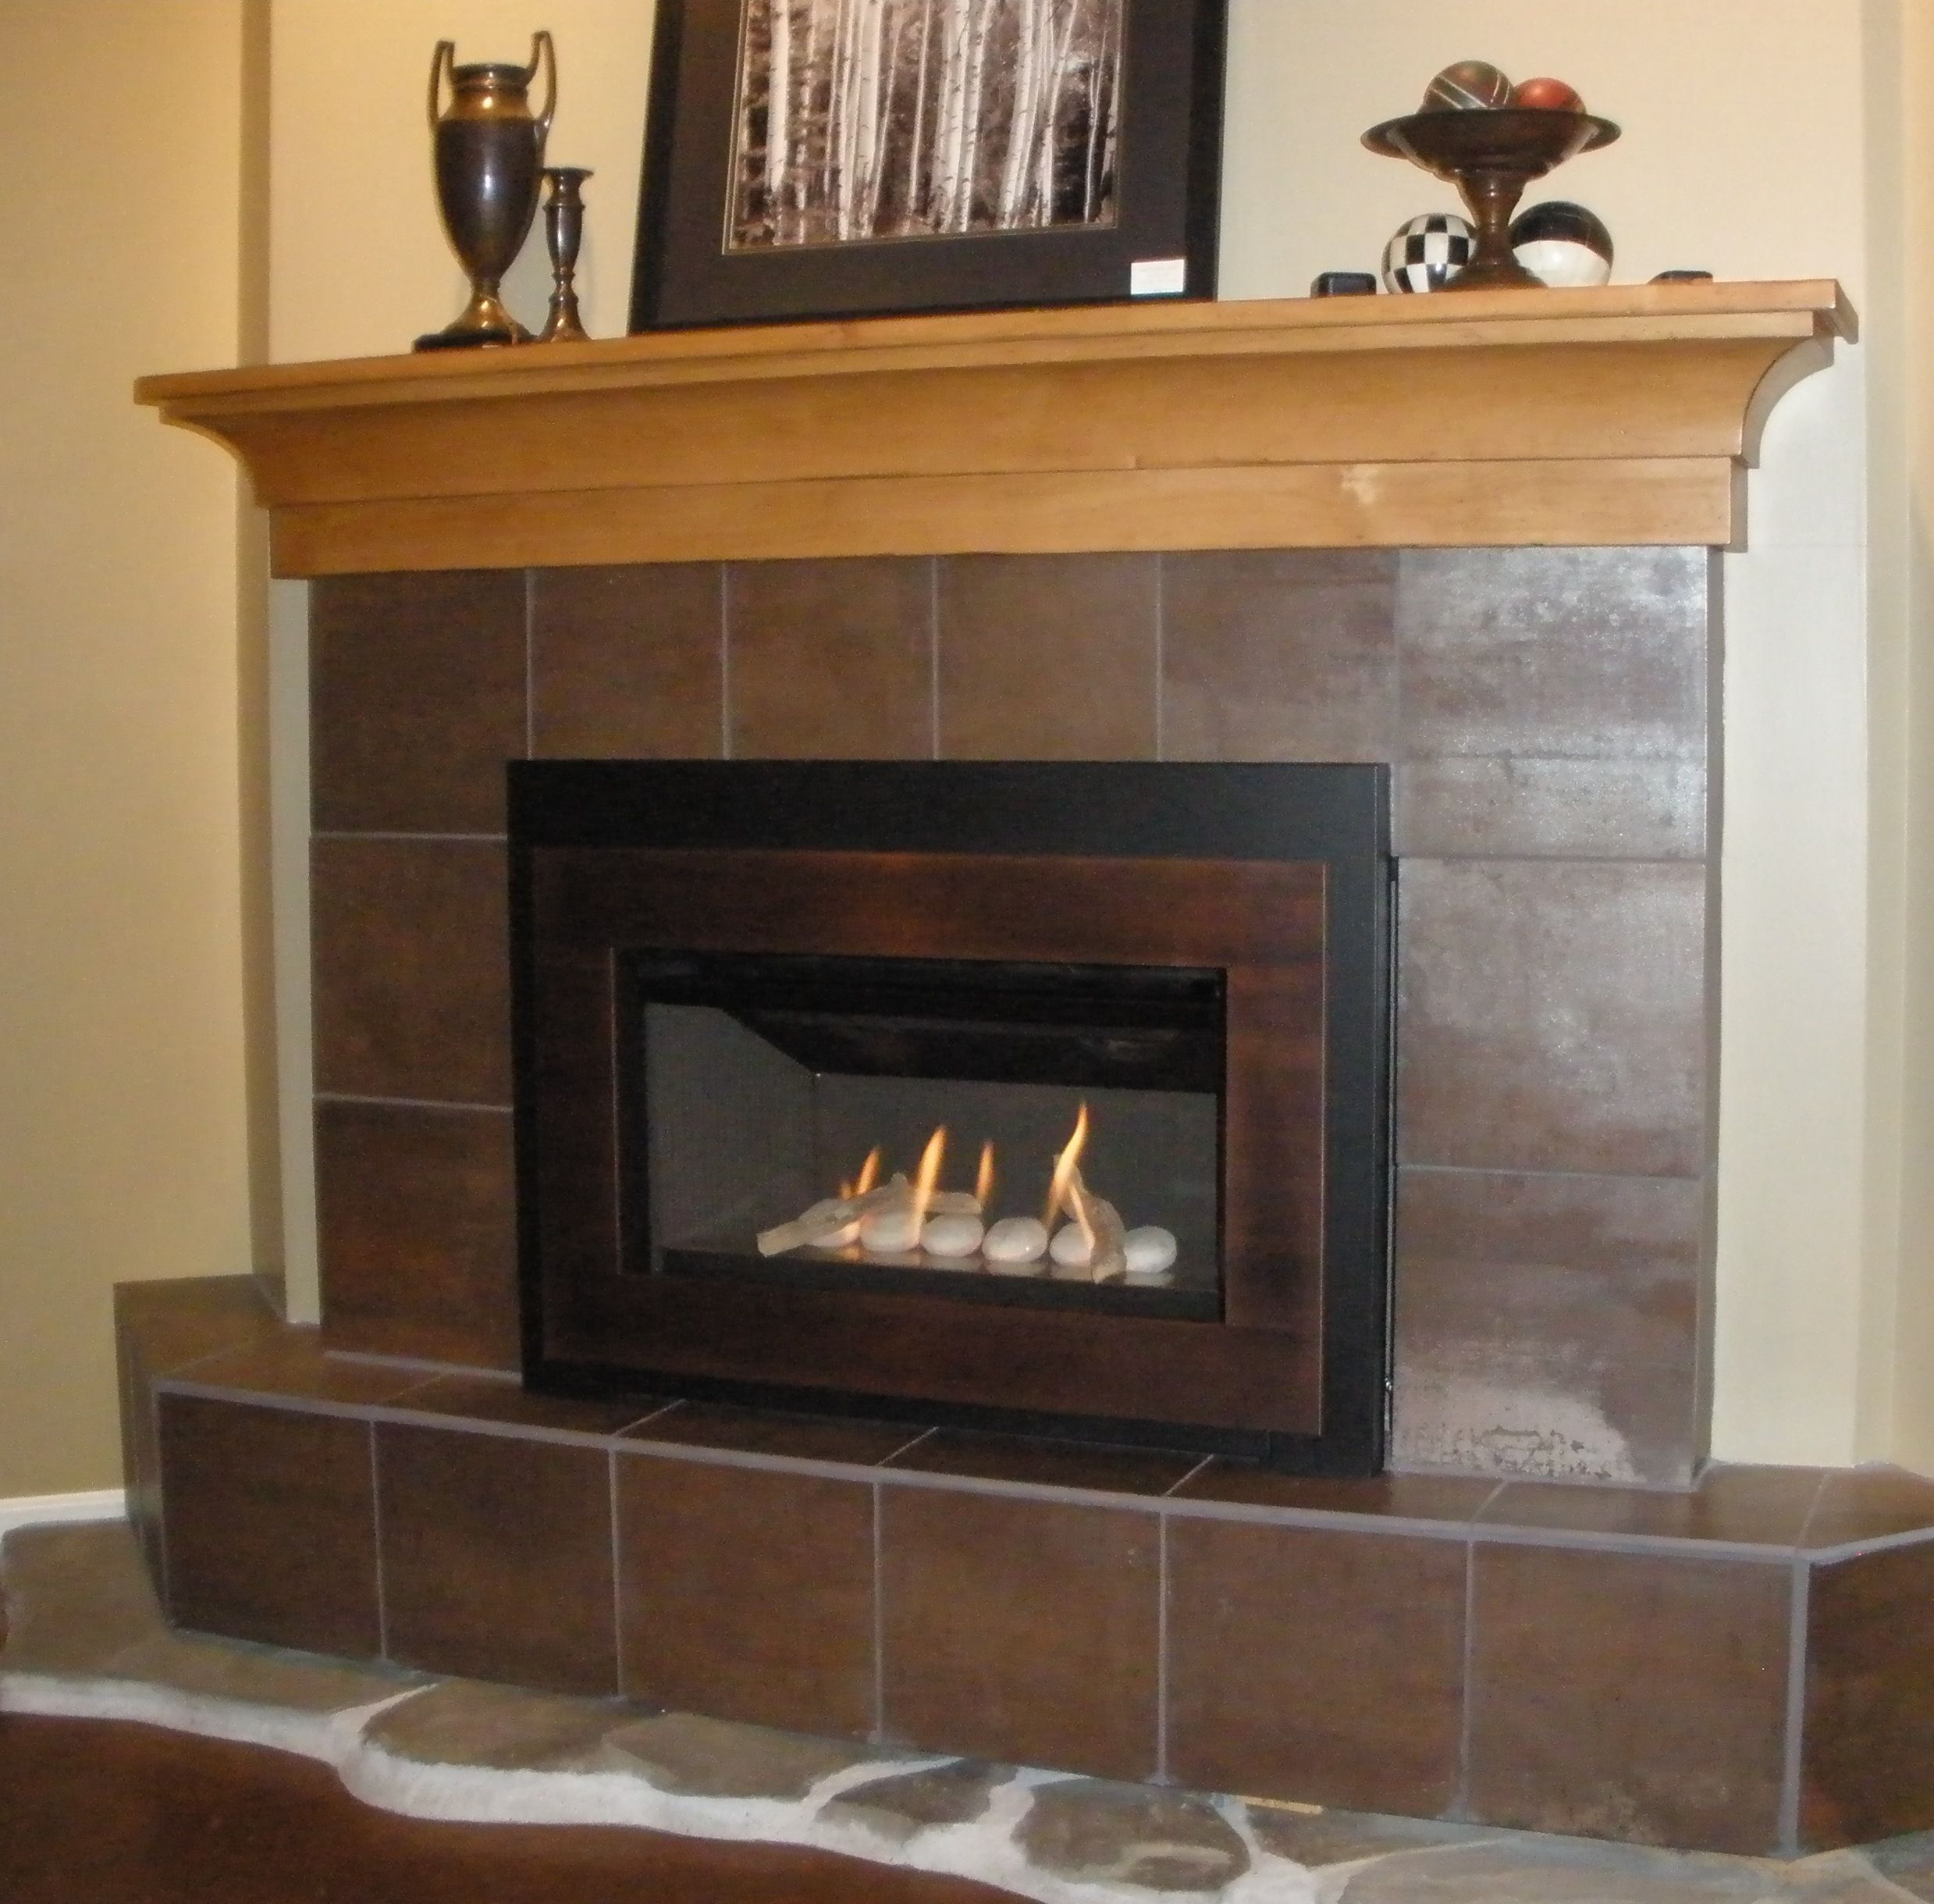 Fireplace Trim Best Of Pin On Valor Radiant Gas Fireplaces Midwest Dealer